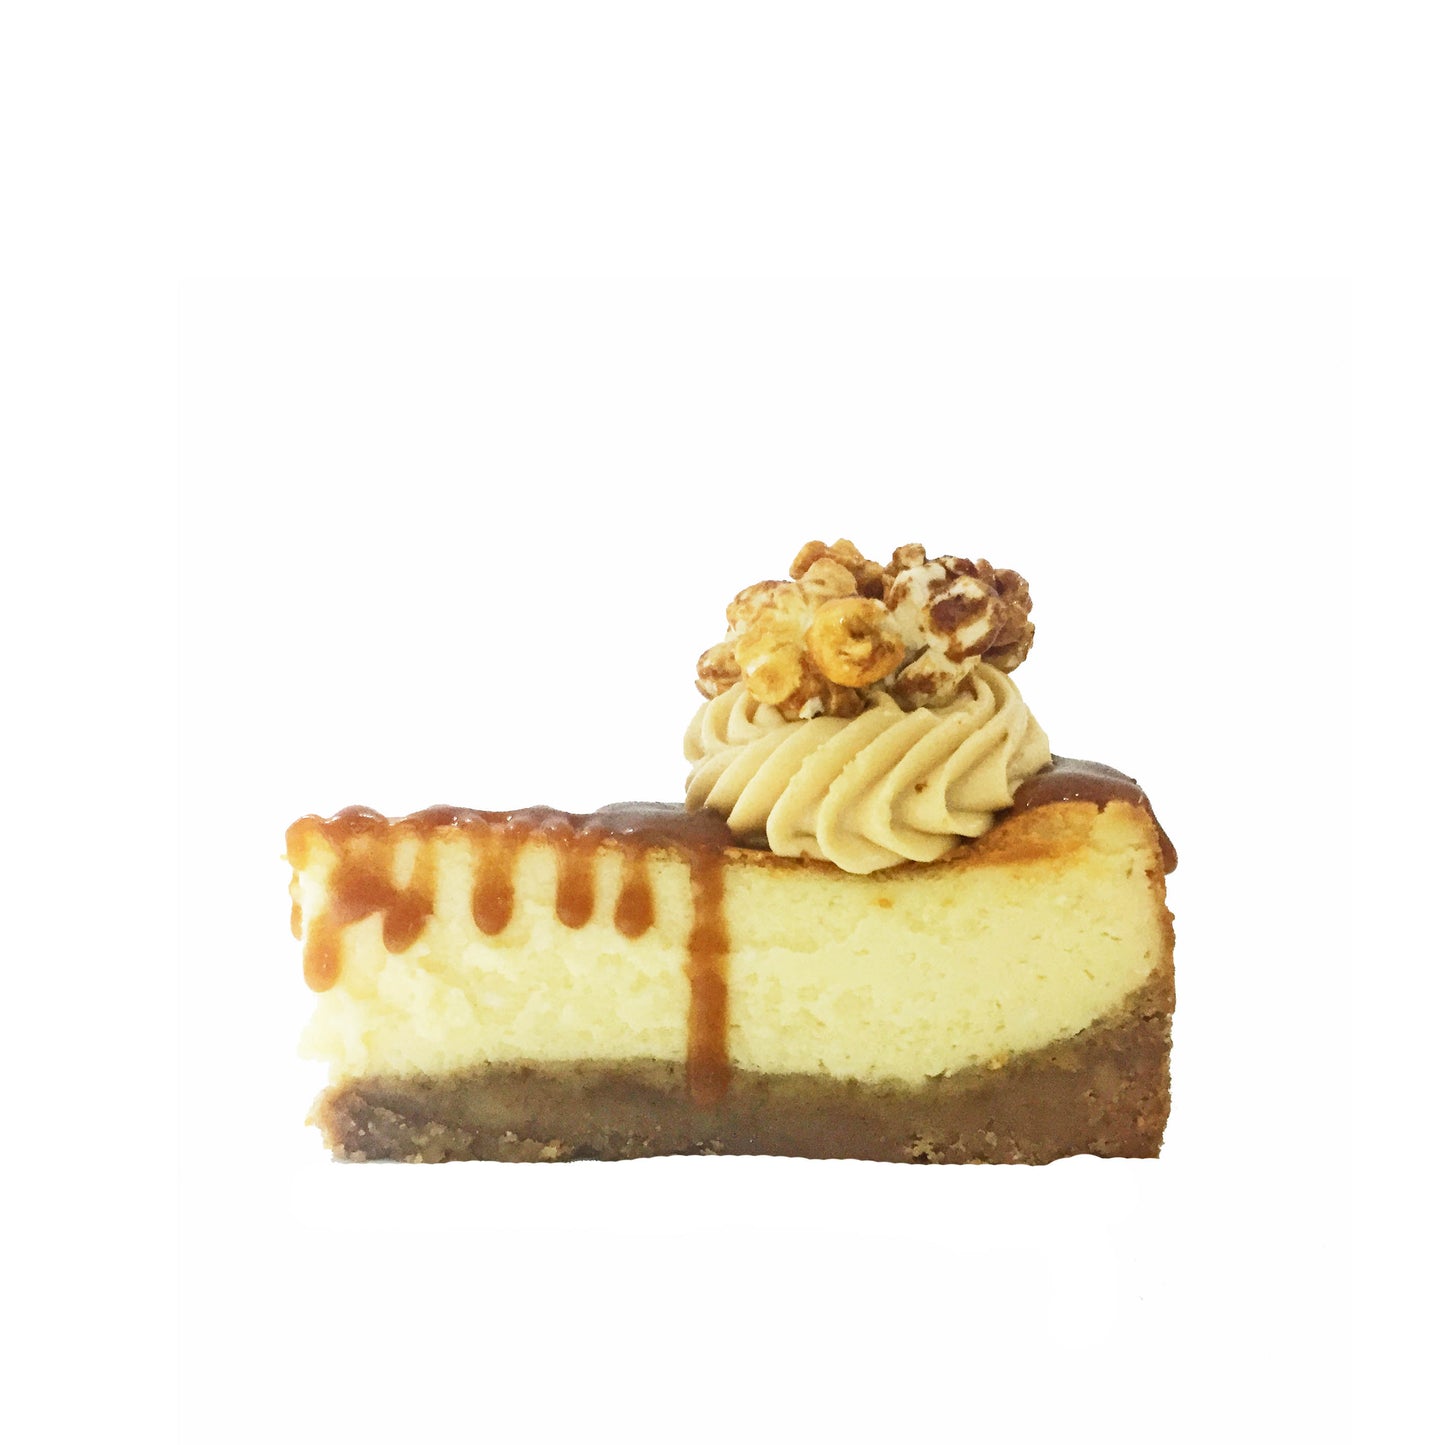 The Salted Caramel Cheesecake